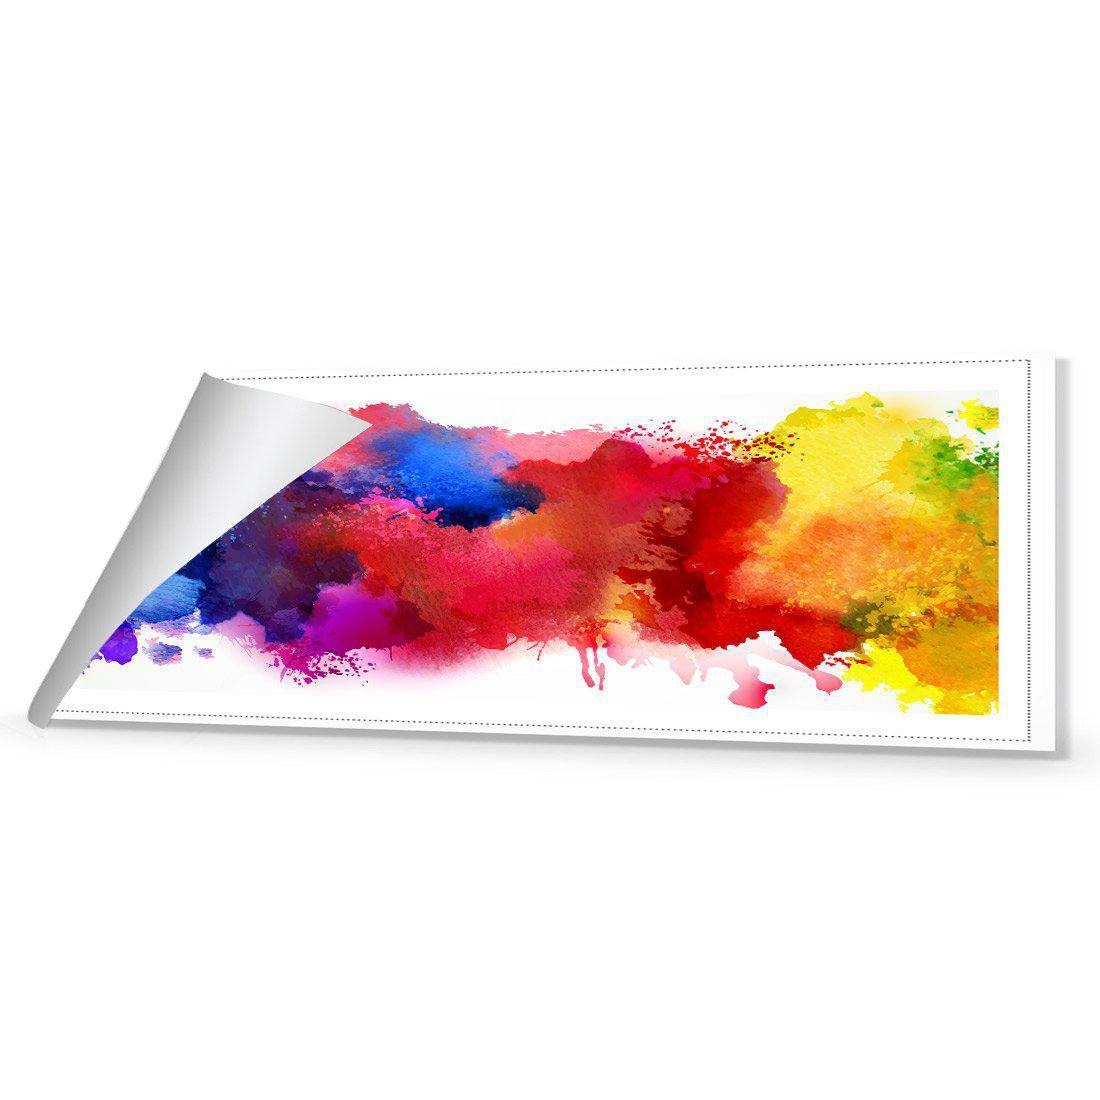 Primary Stains Canvas Art-Canvas-Wall Art Designs-60x20cm-Rolled Canvas-Wall Art Designs